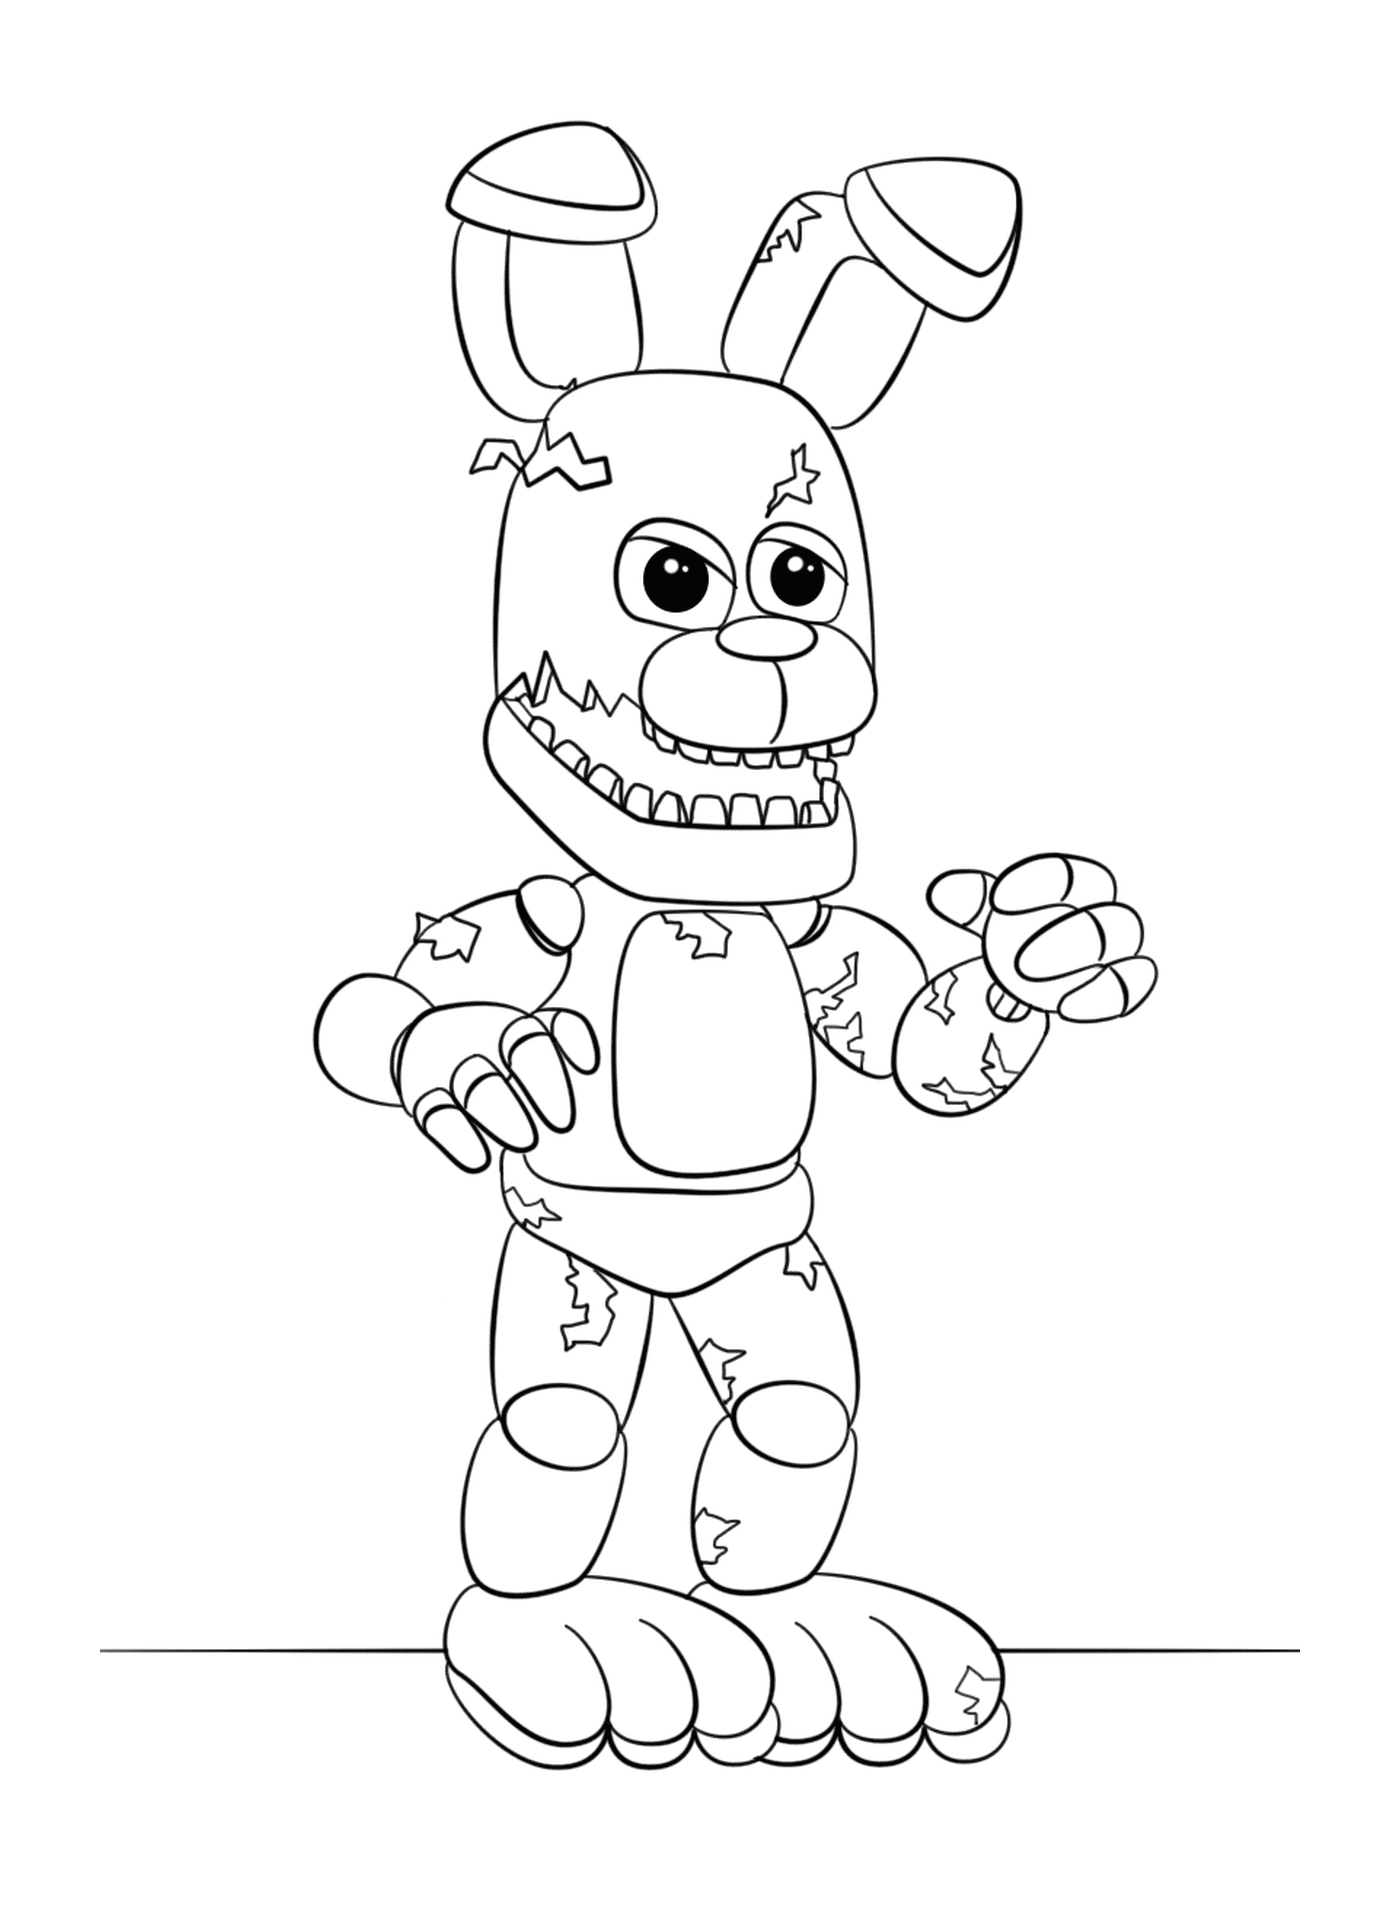  A toy that looks like Springtrap 